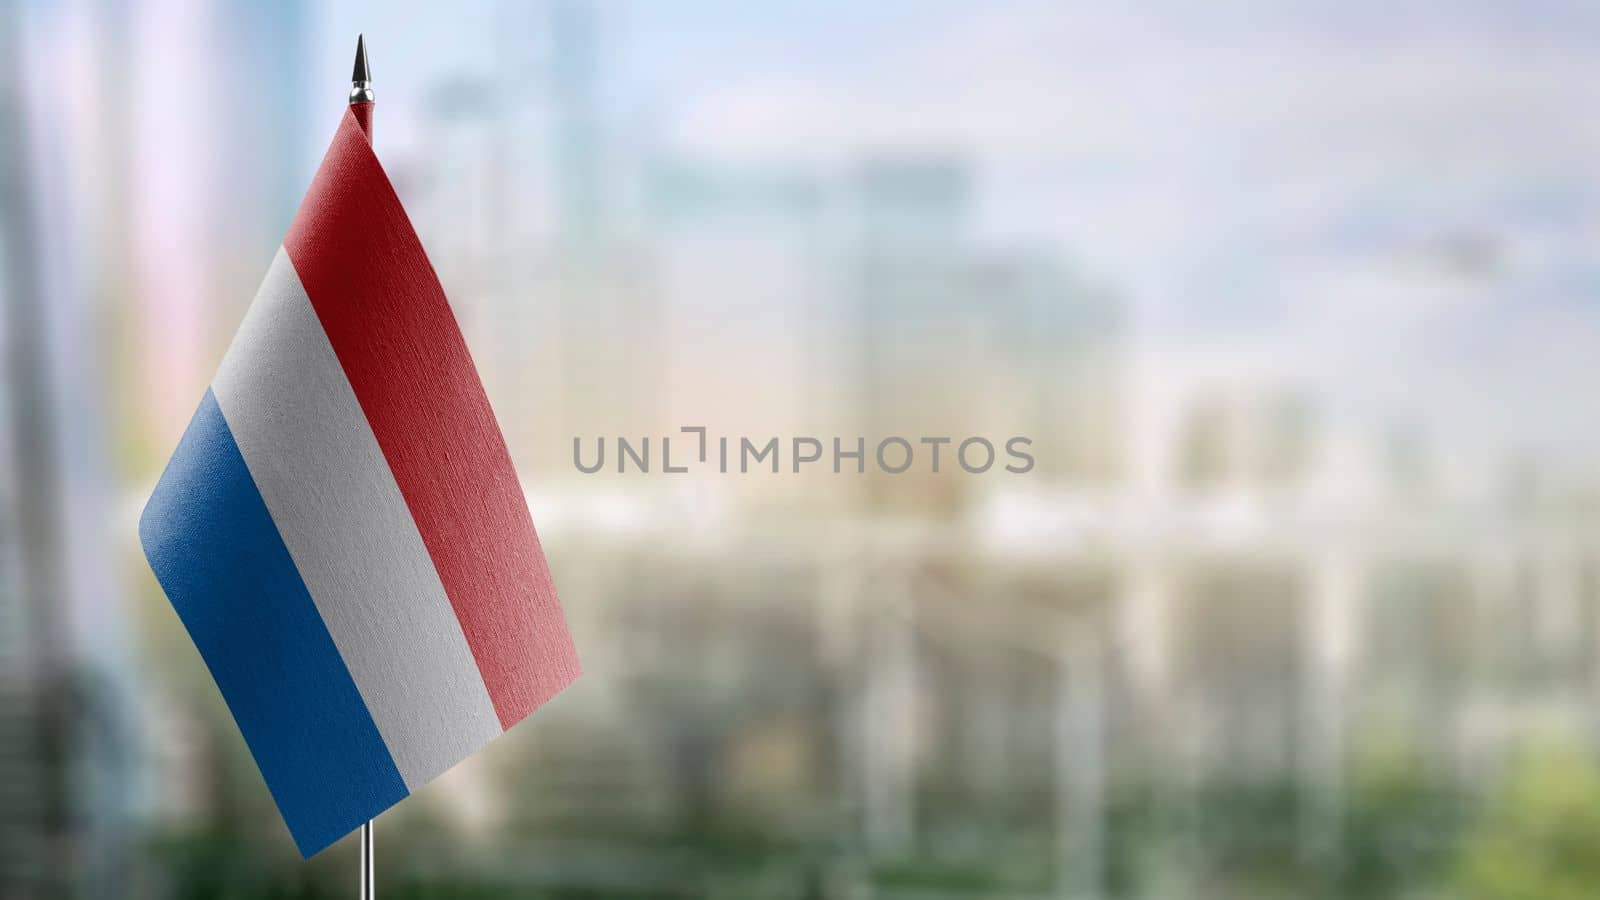 A small Netherlands flag on an abstract blurry background.